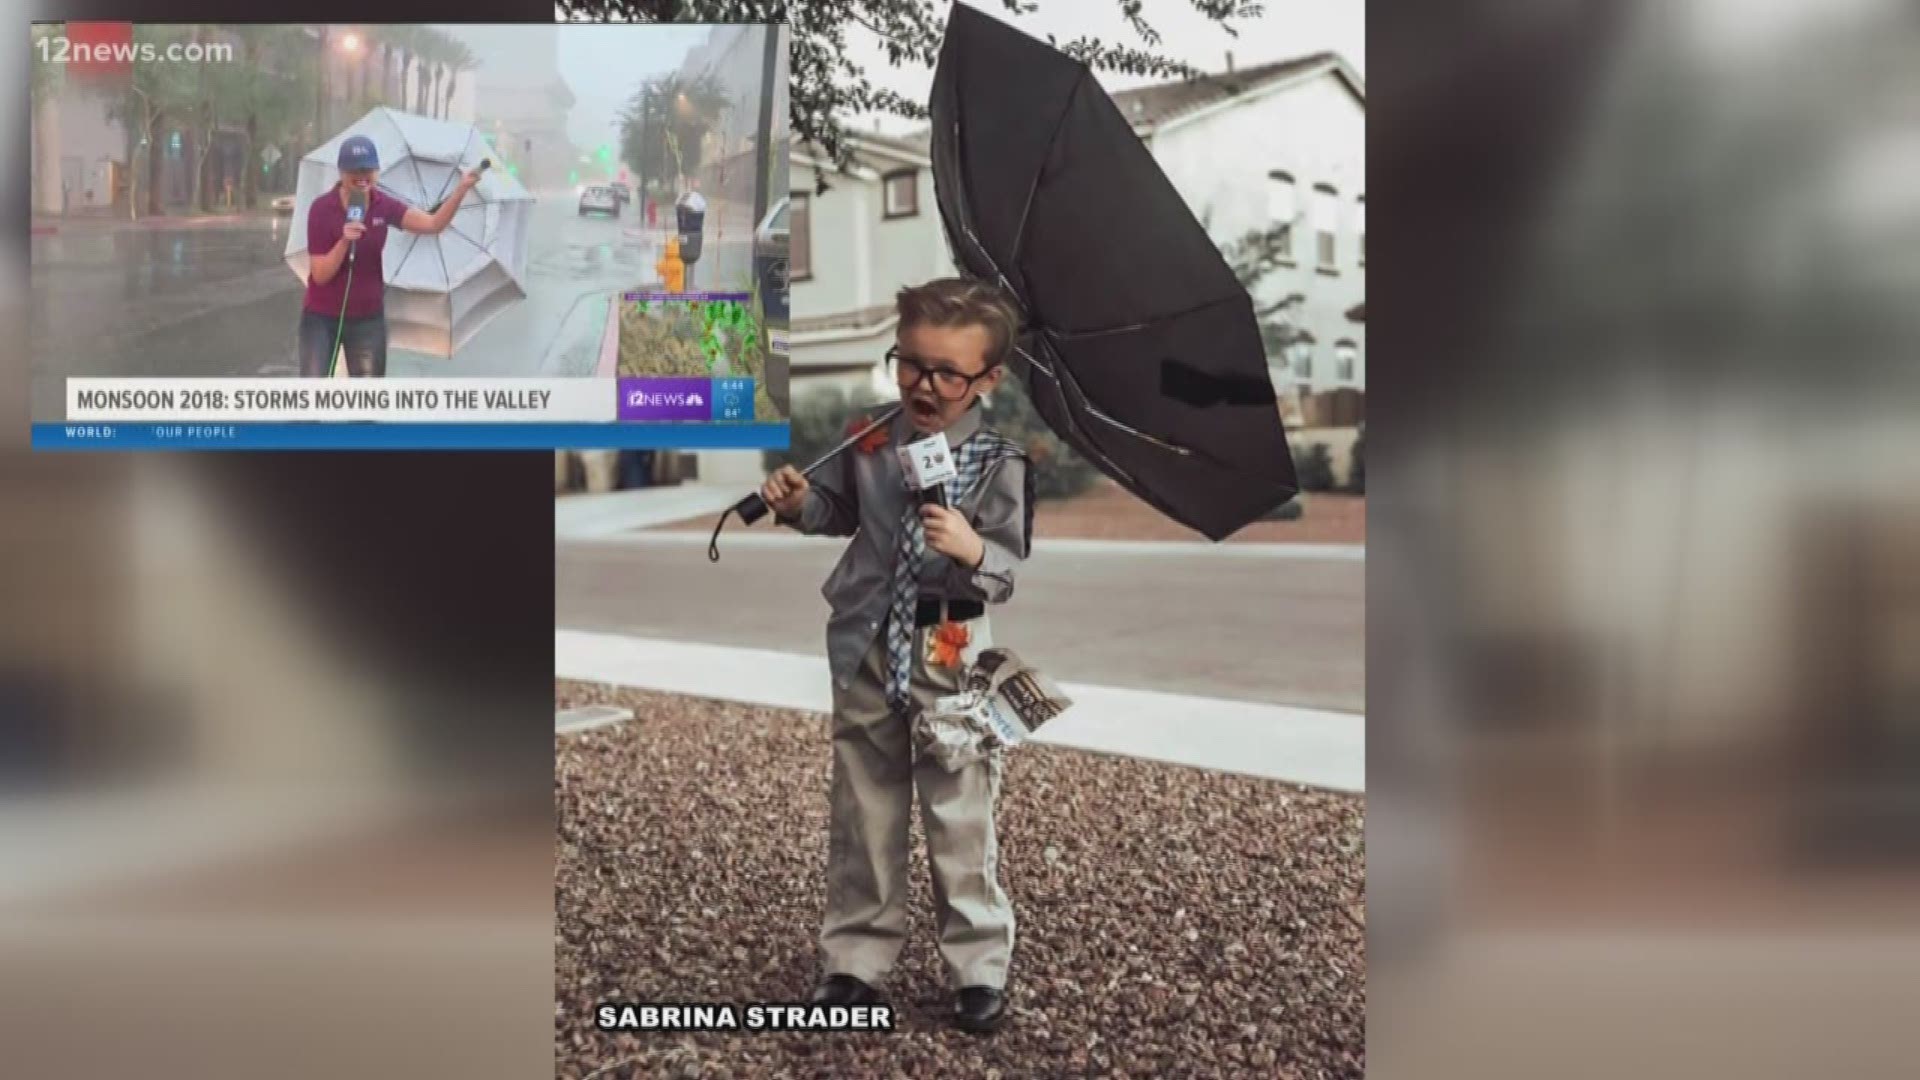 A 12 News viewer sent a photo of her 7-year-old new caster looking just like meteorologist Krystle Henderson when she covered monsoon in August.